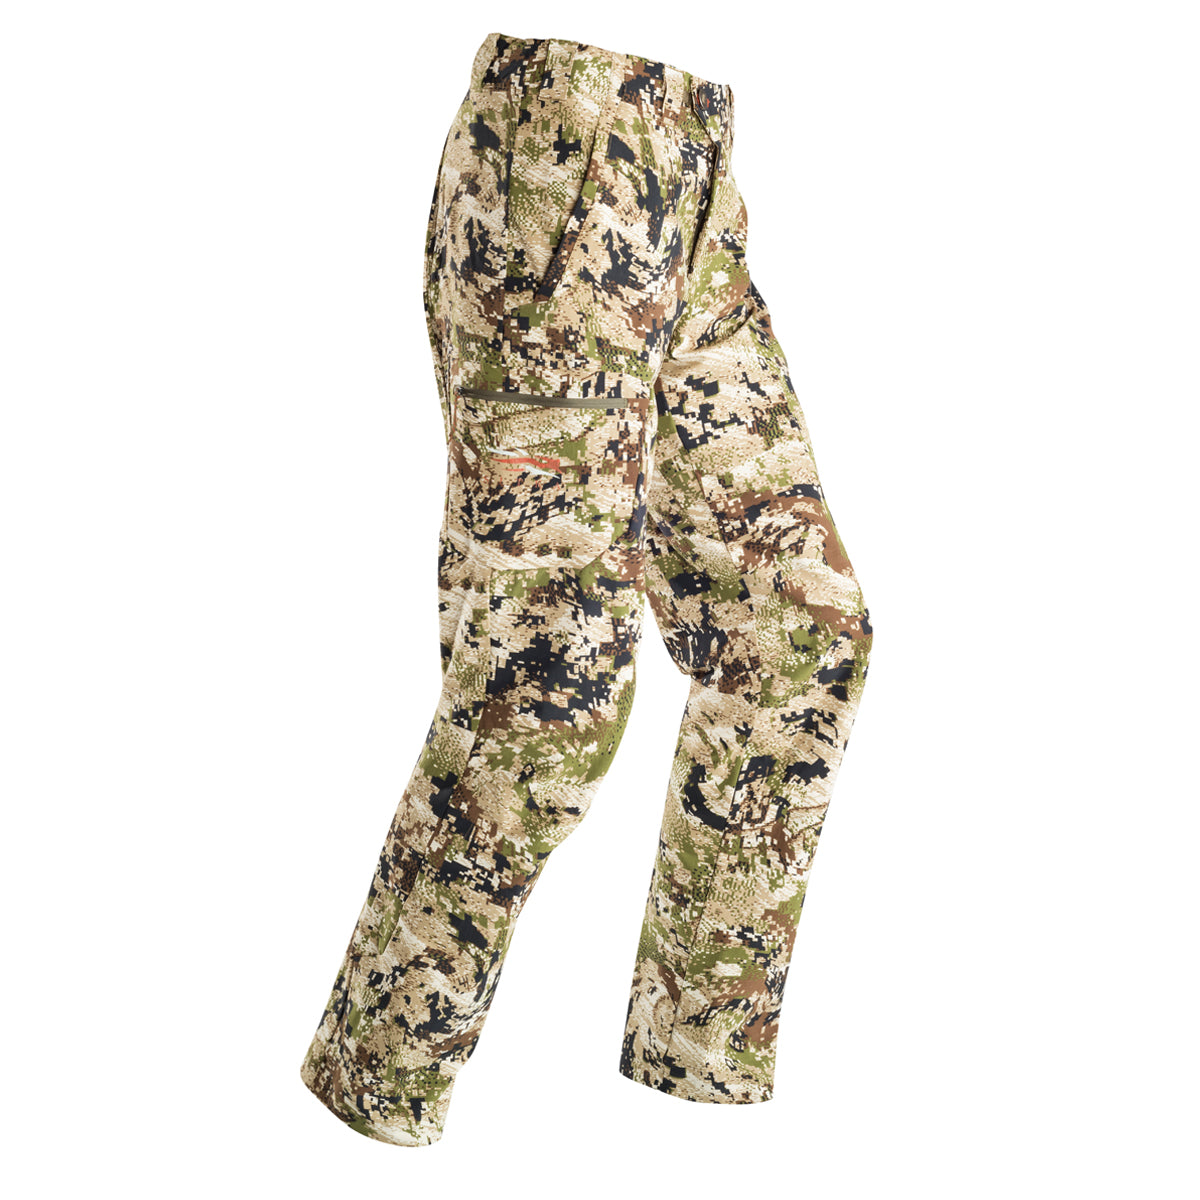 Sitka Ascent Pant in Sitka Ascent Pant by Sitka | Apparel - goHUNT Shop by GOHUNT | Sitka - GOHUNT Shop